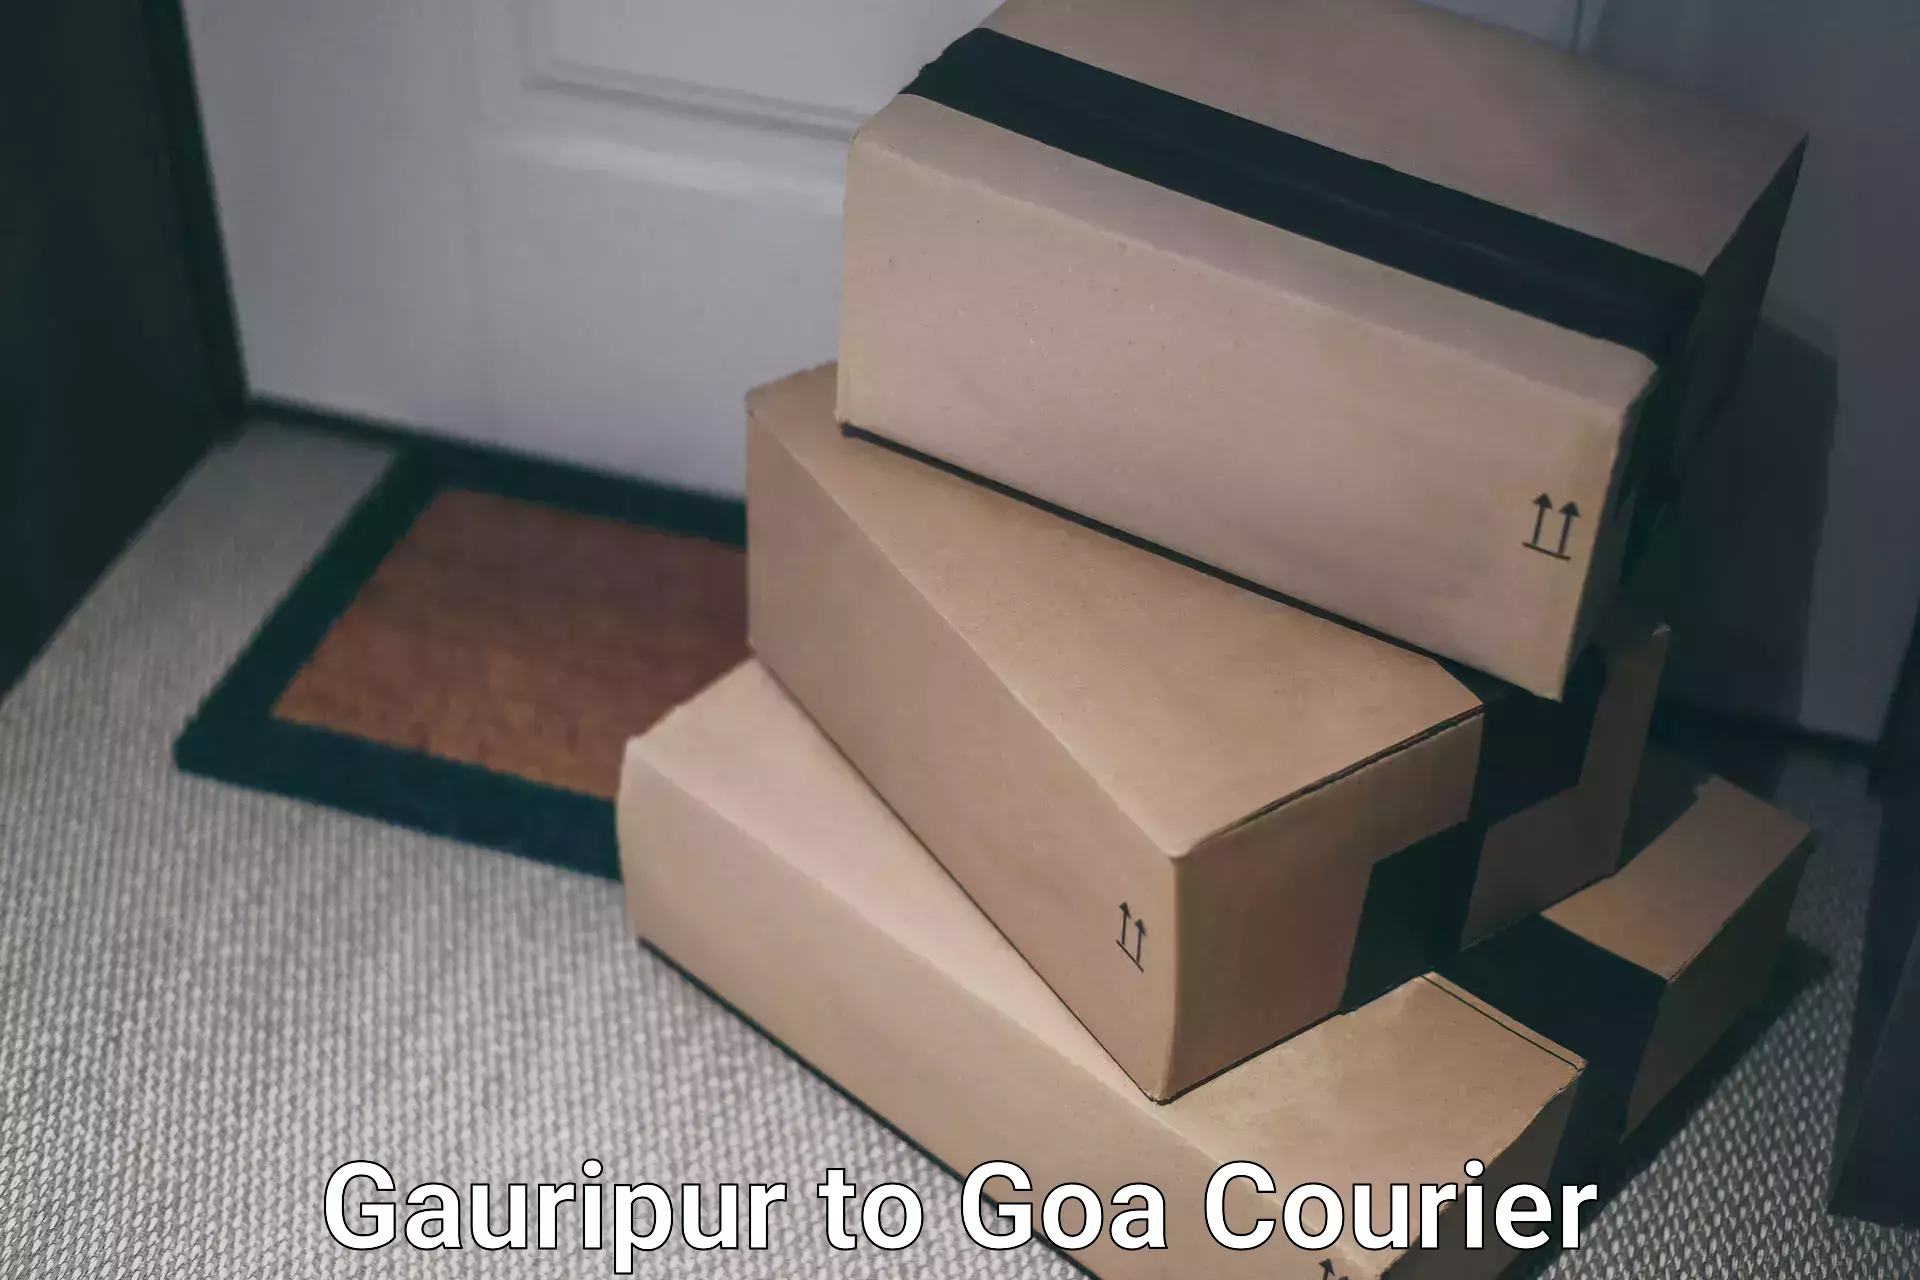 Reliable delivery network Gauripur to Panjim